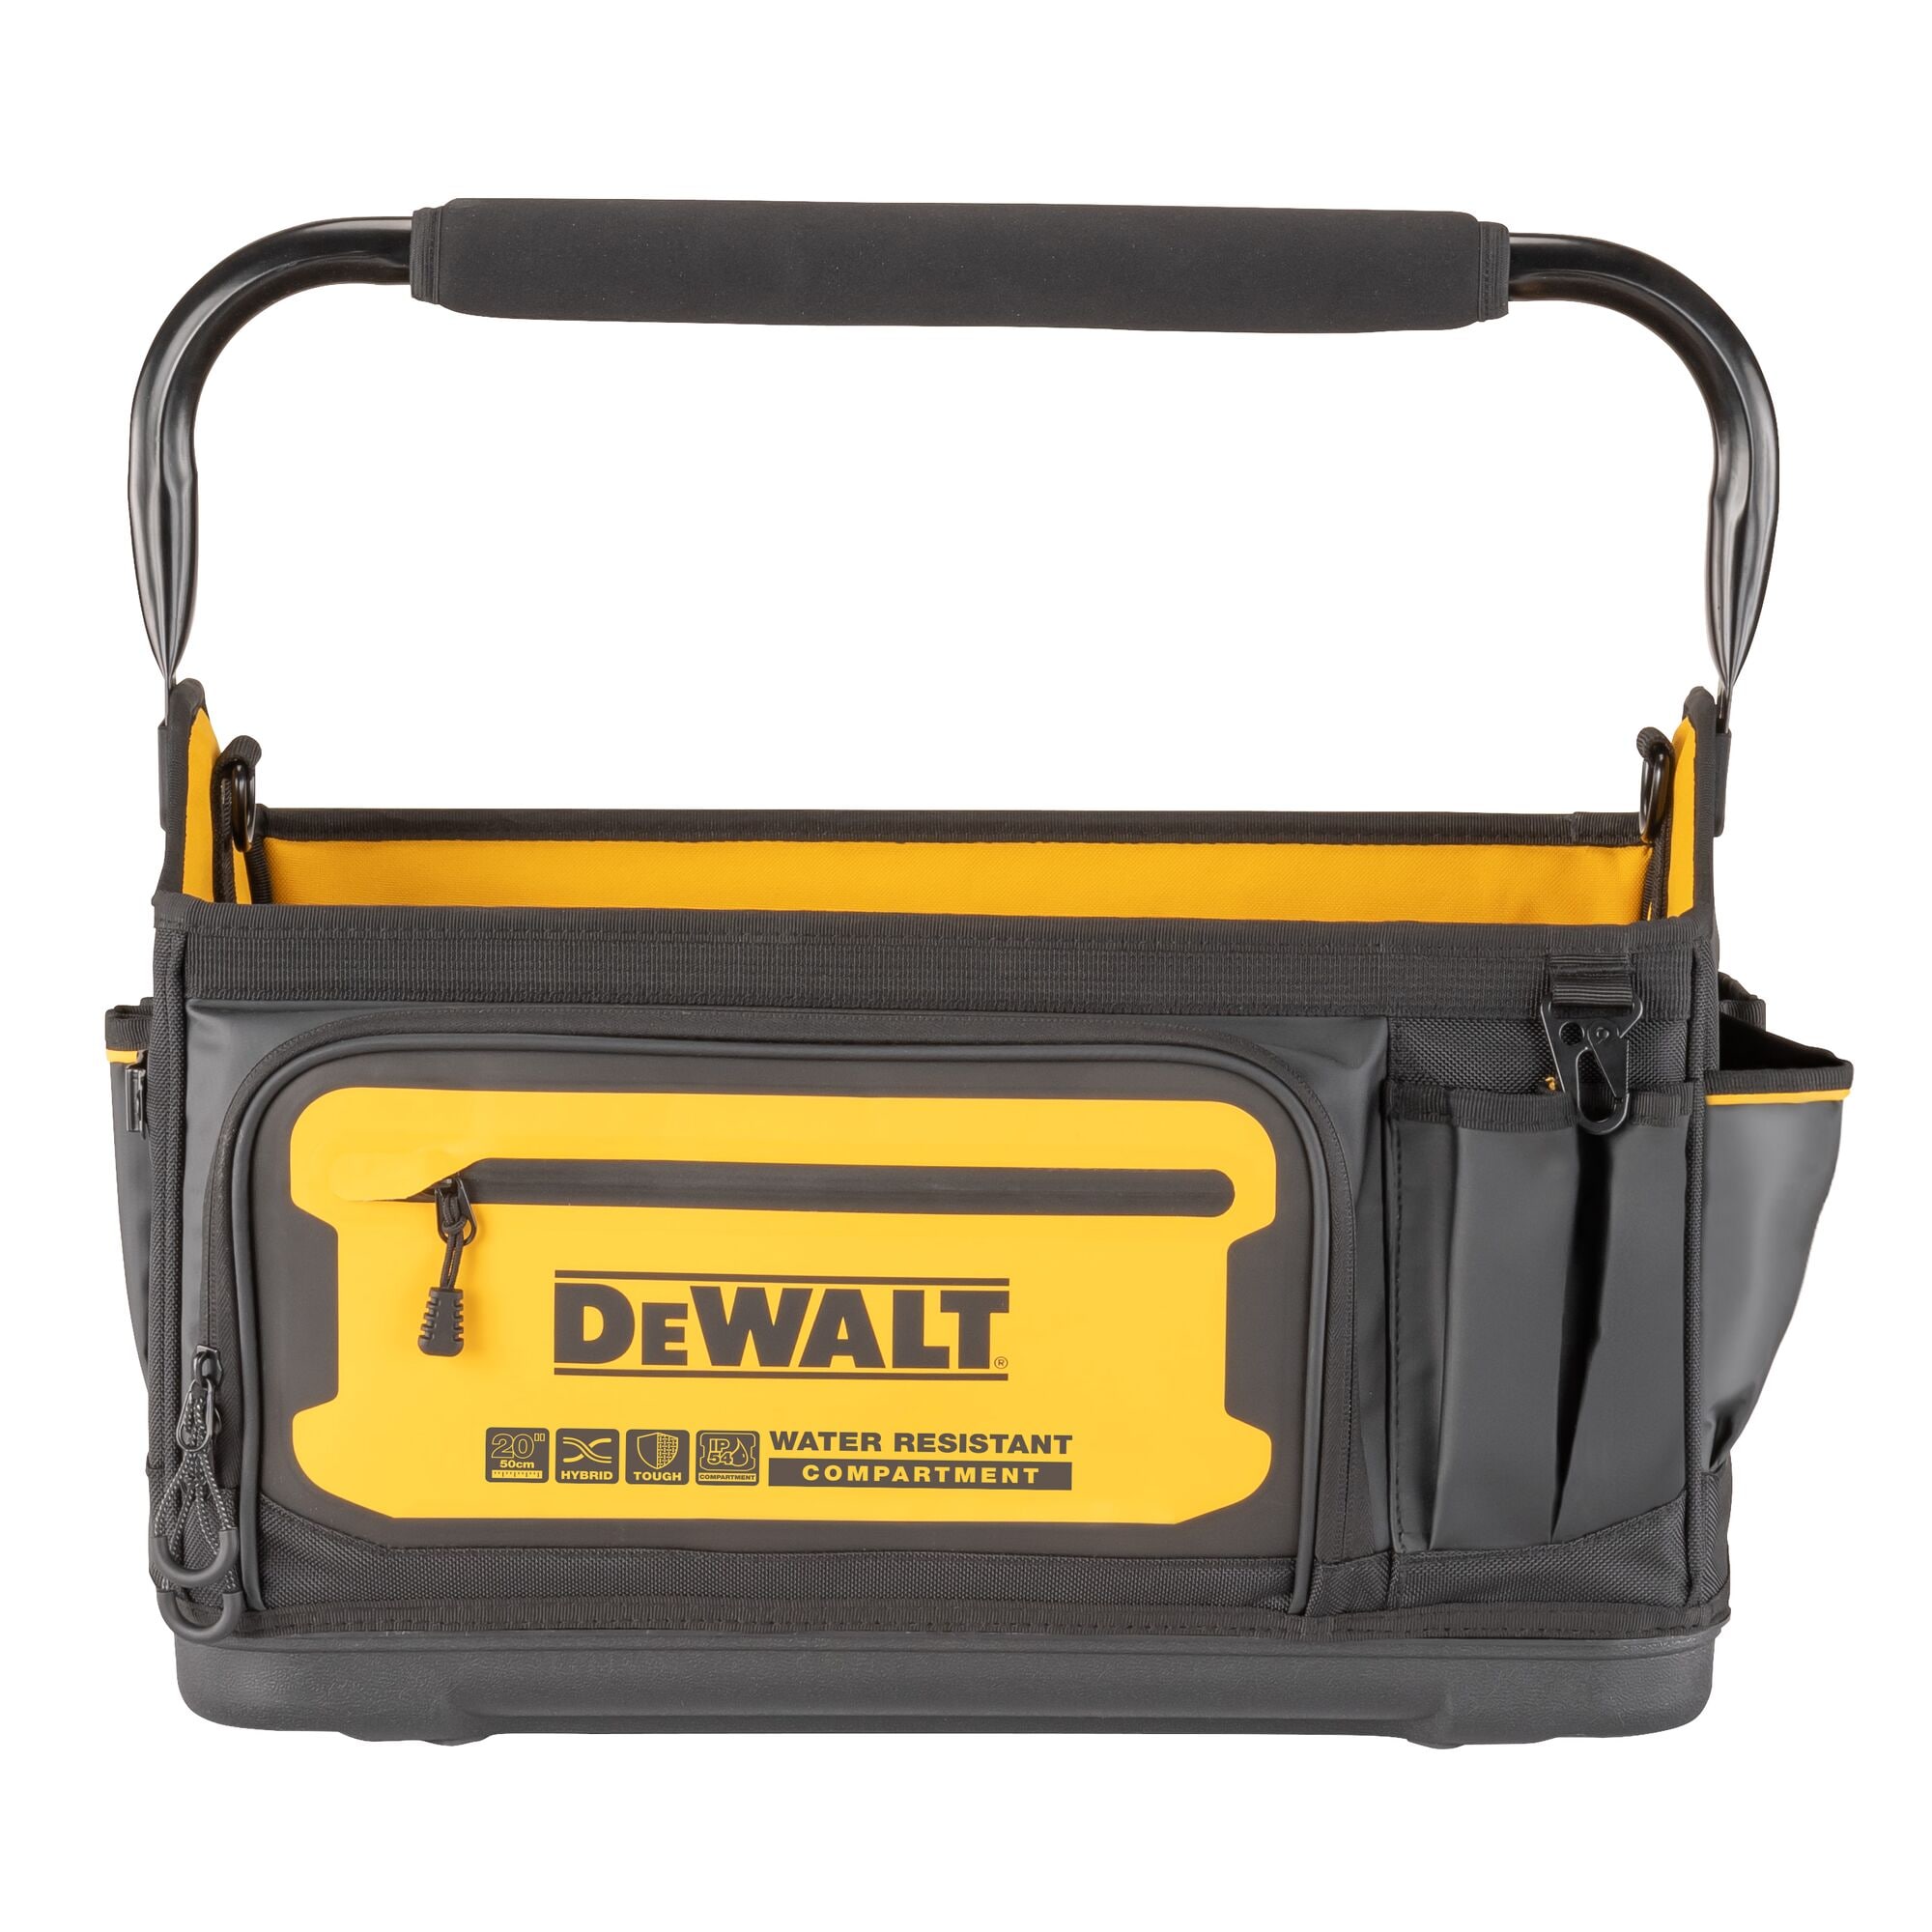 DEWALT Black/Yellow Polyester 8-in Zippered Backpack at